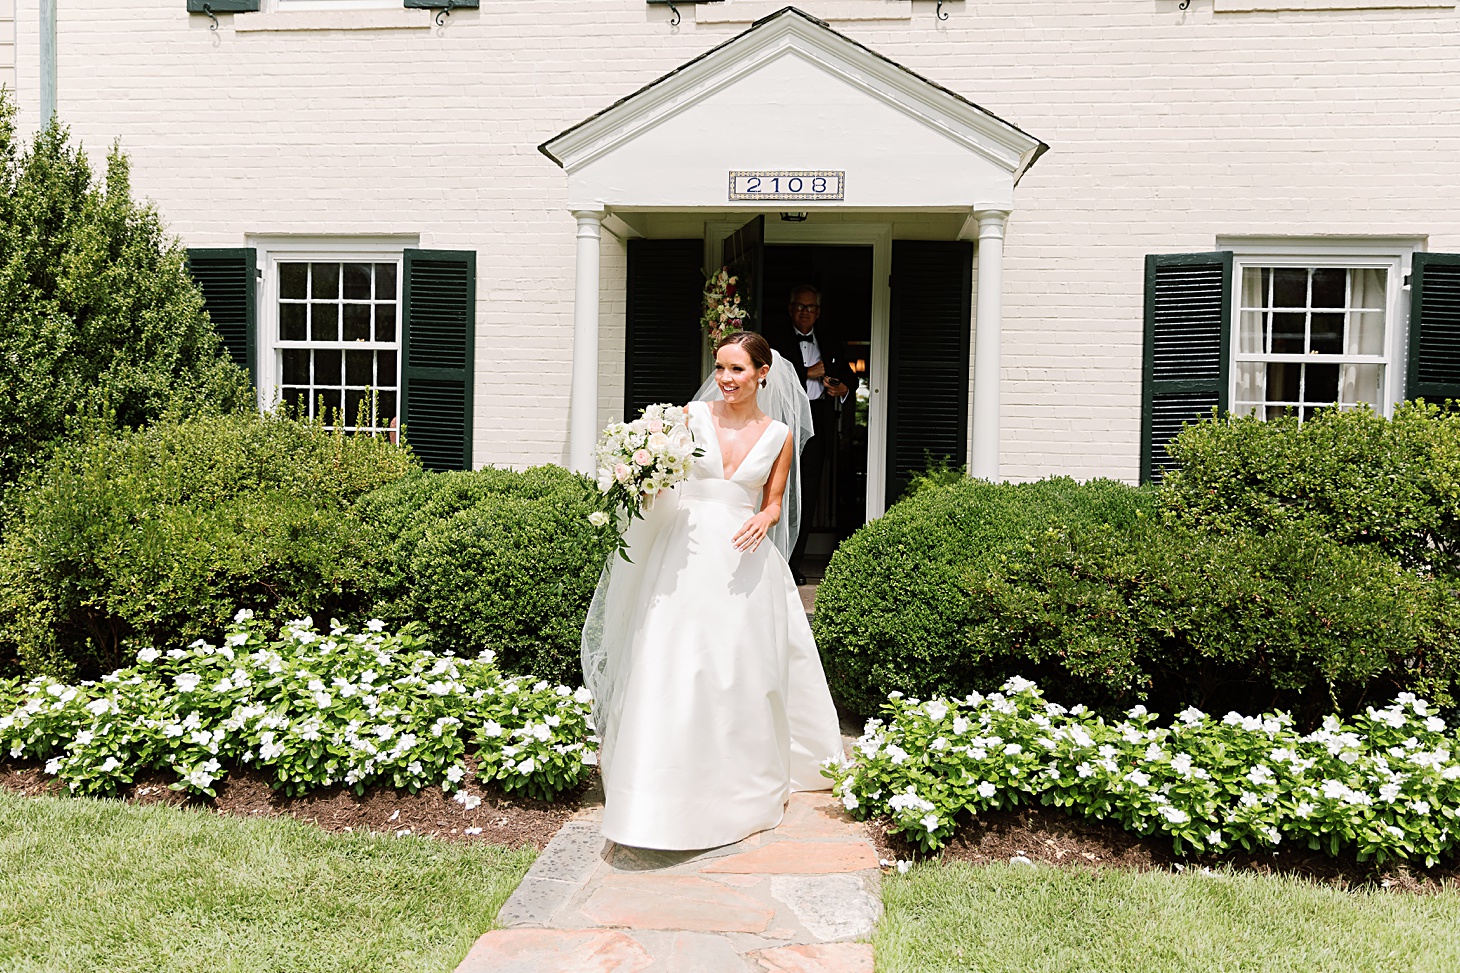 Getting ready at home Traditional Family Wedding at Belle Haven Country Club in Alexandria by Sarah Bradshaw